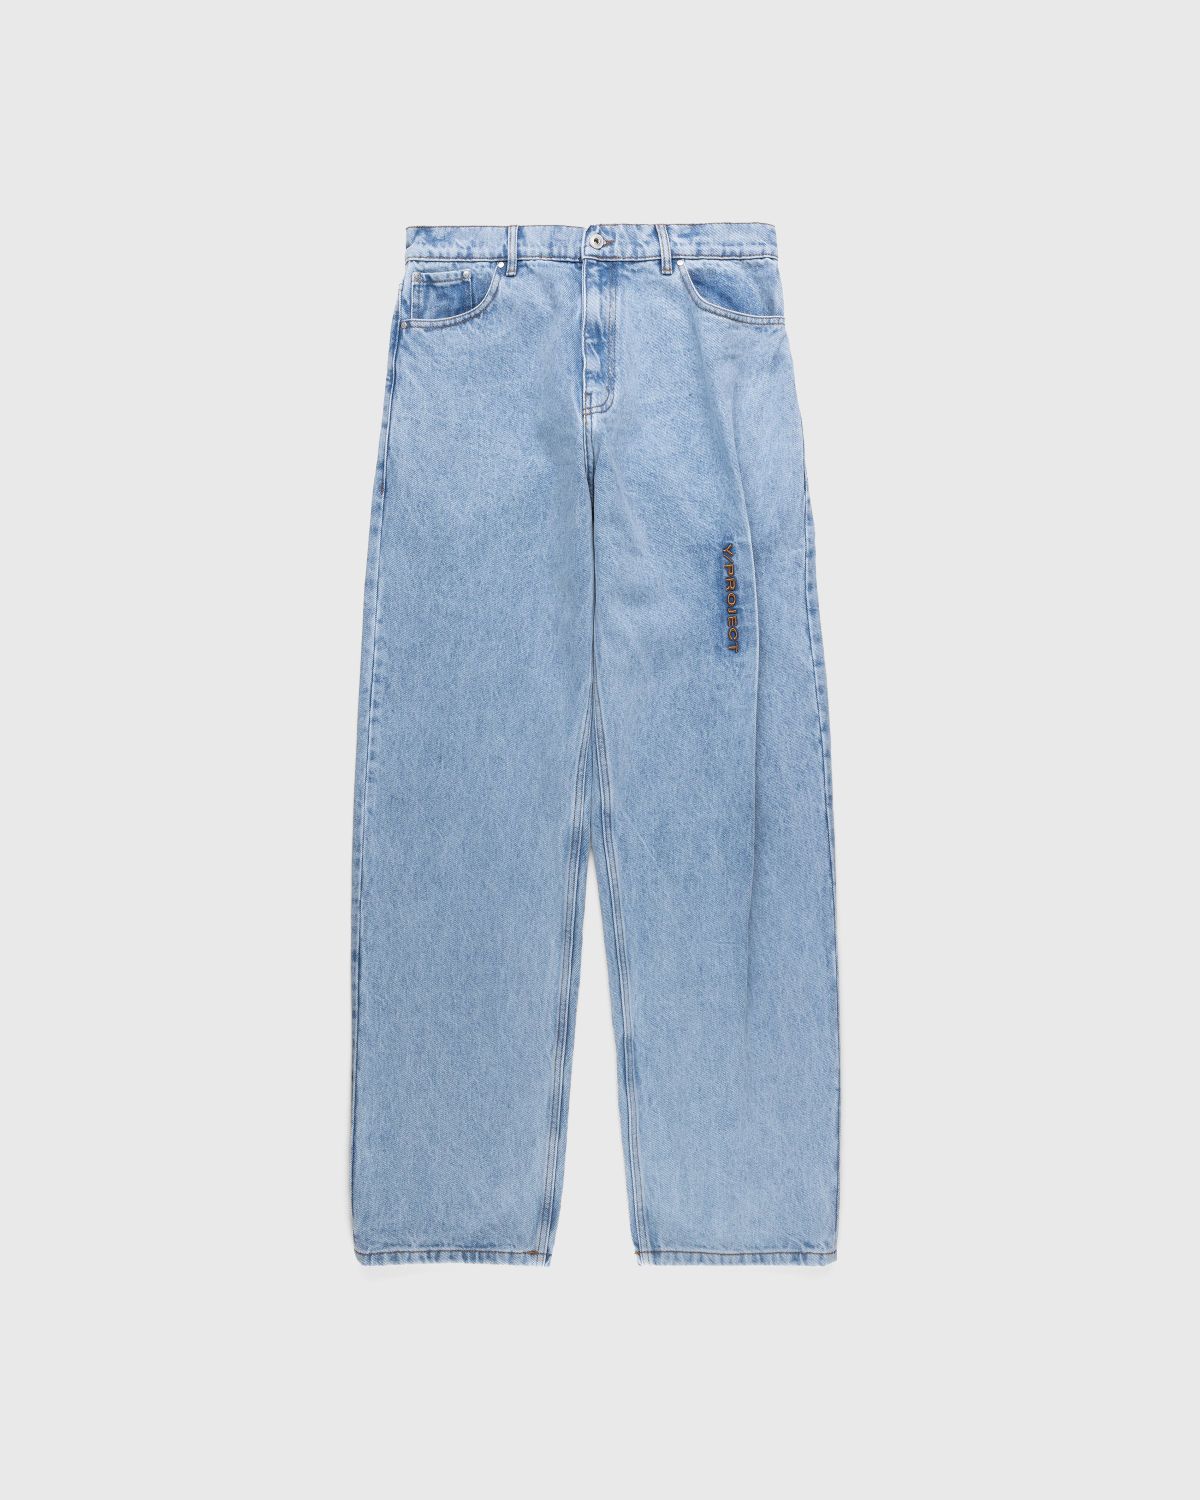 Yproject  22aw Pinched Logo denim